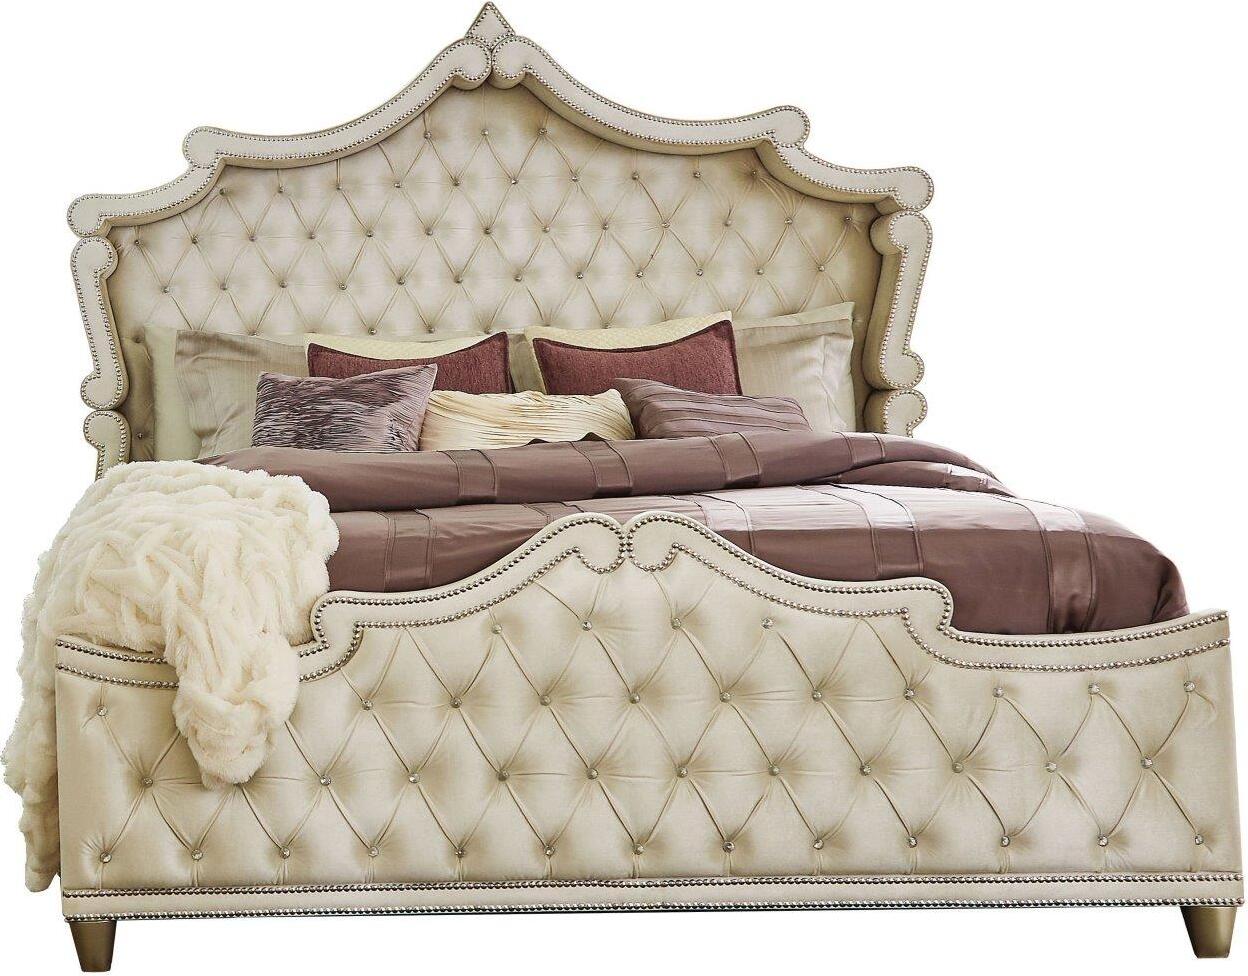 Antonella Ivory And Camel King, Sanctuary Upholstered Headboard King